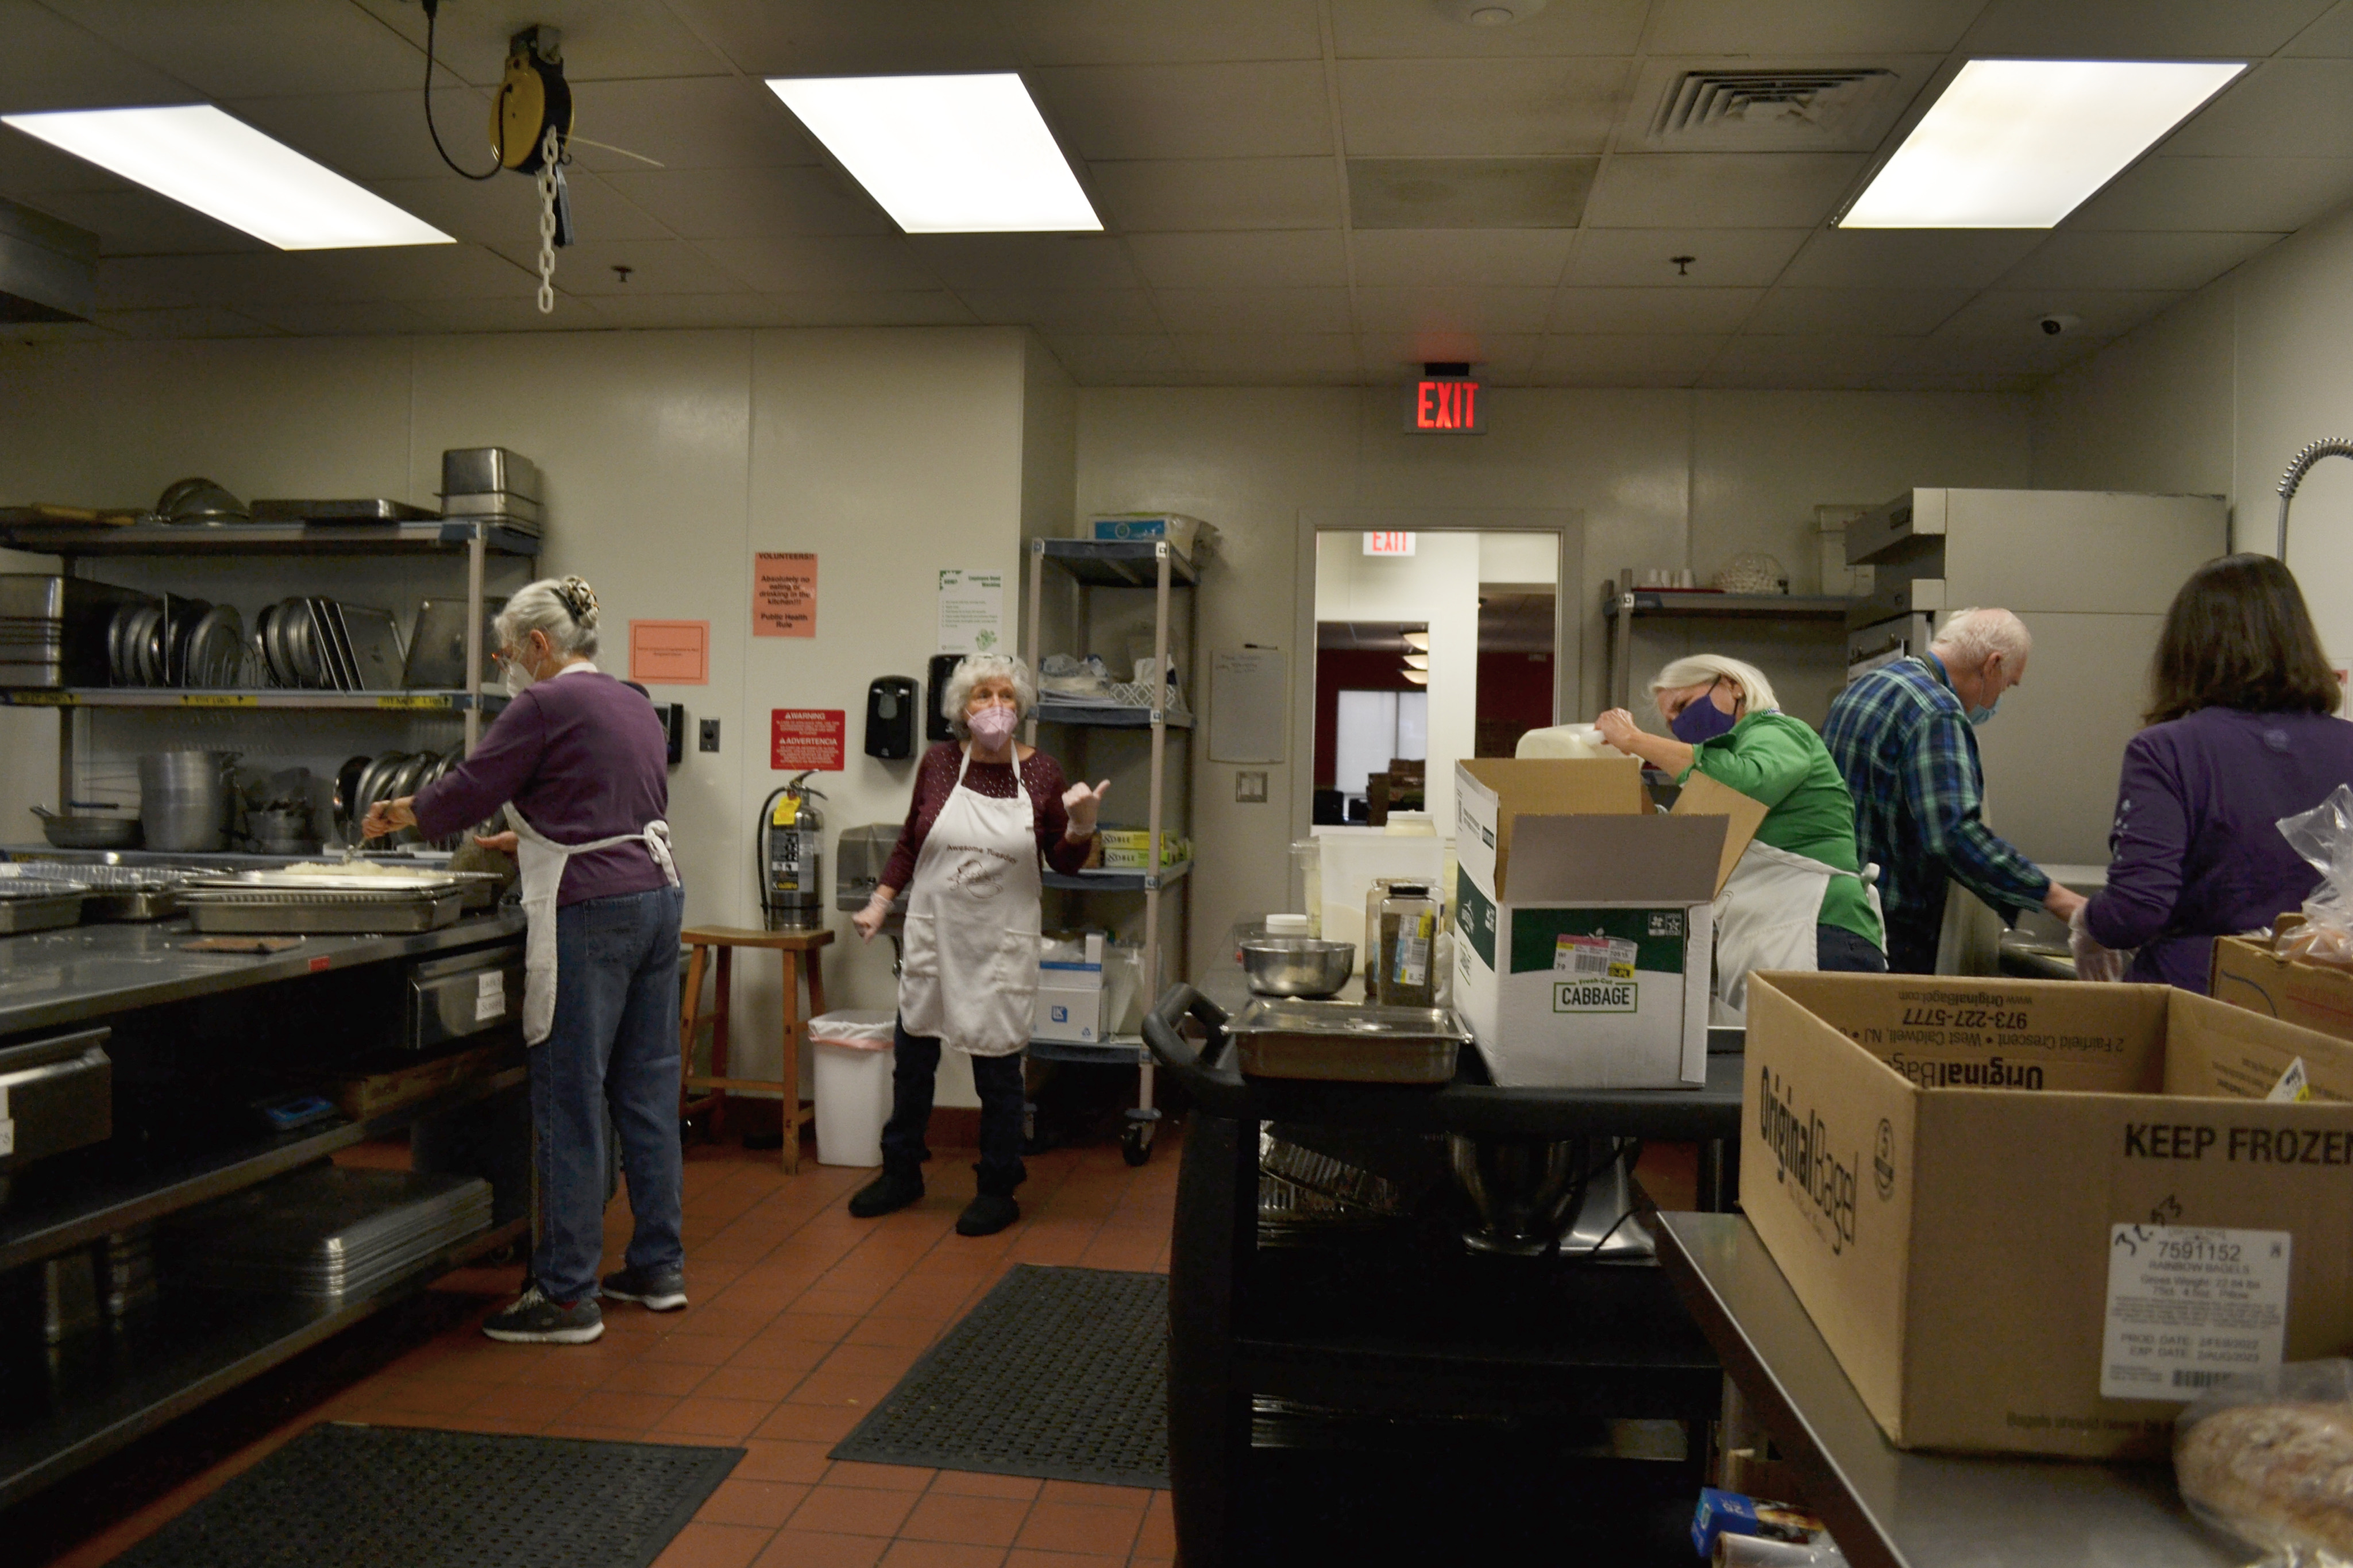 Inside the kitchen, many volunteers are working to prepare lunch for the Daily Bread Soup Kitchen. Photo by Alyssa Buckley.